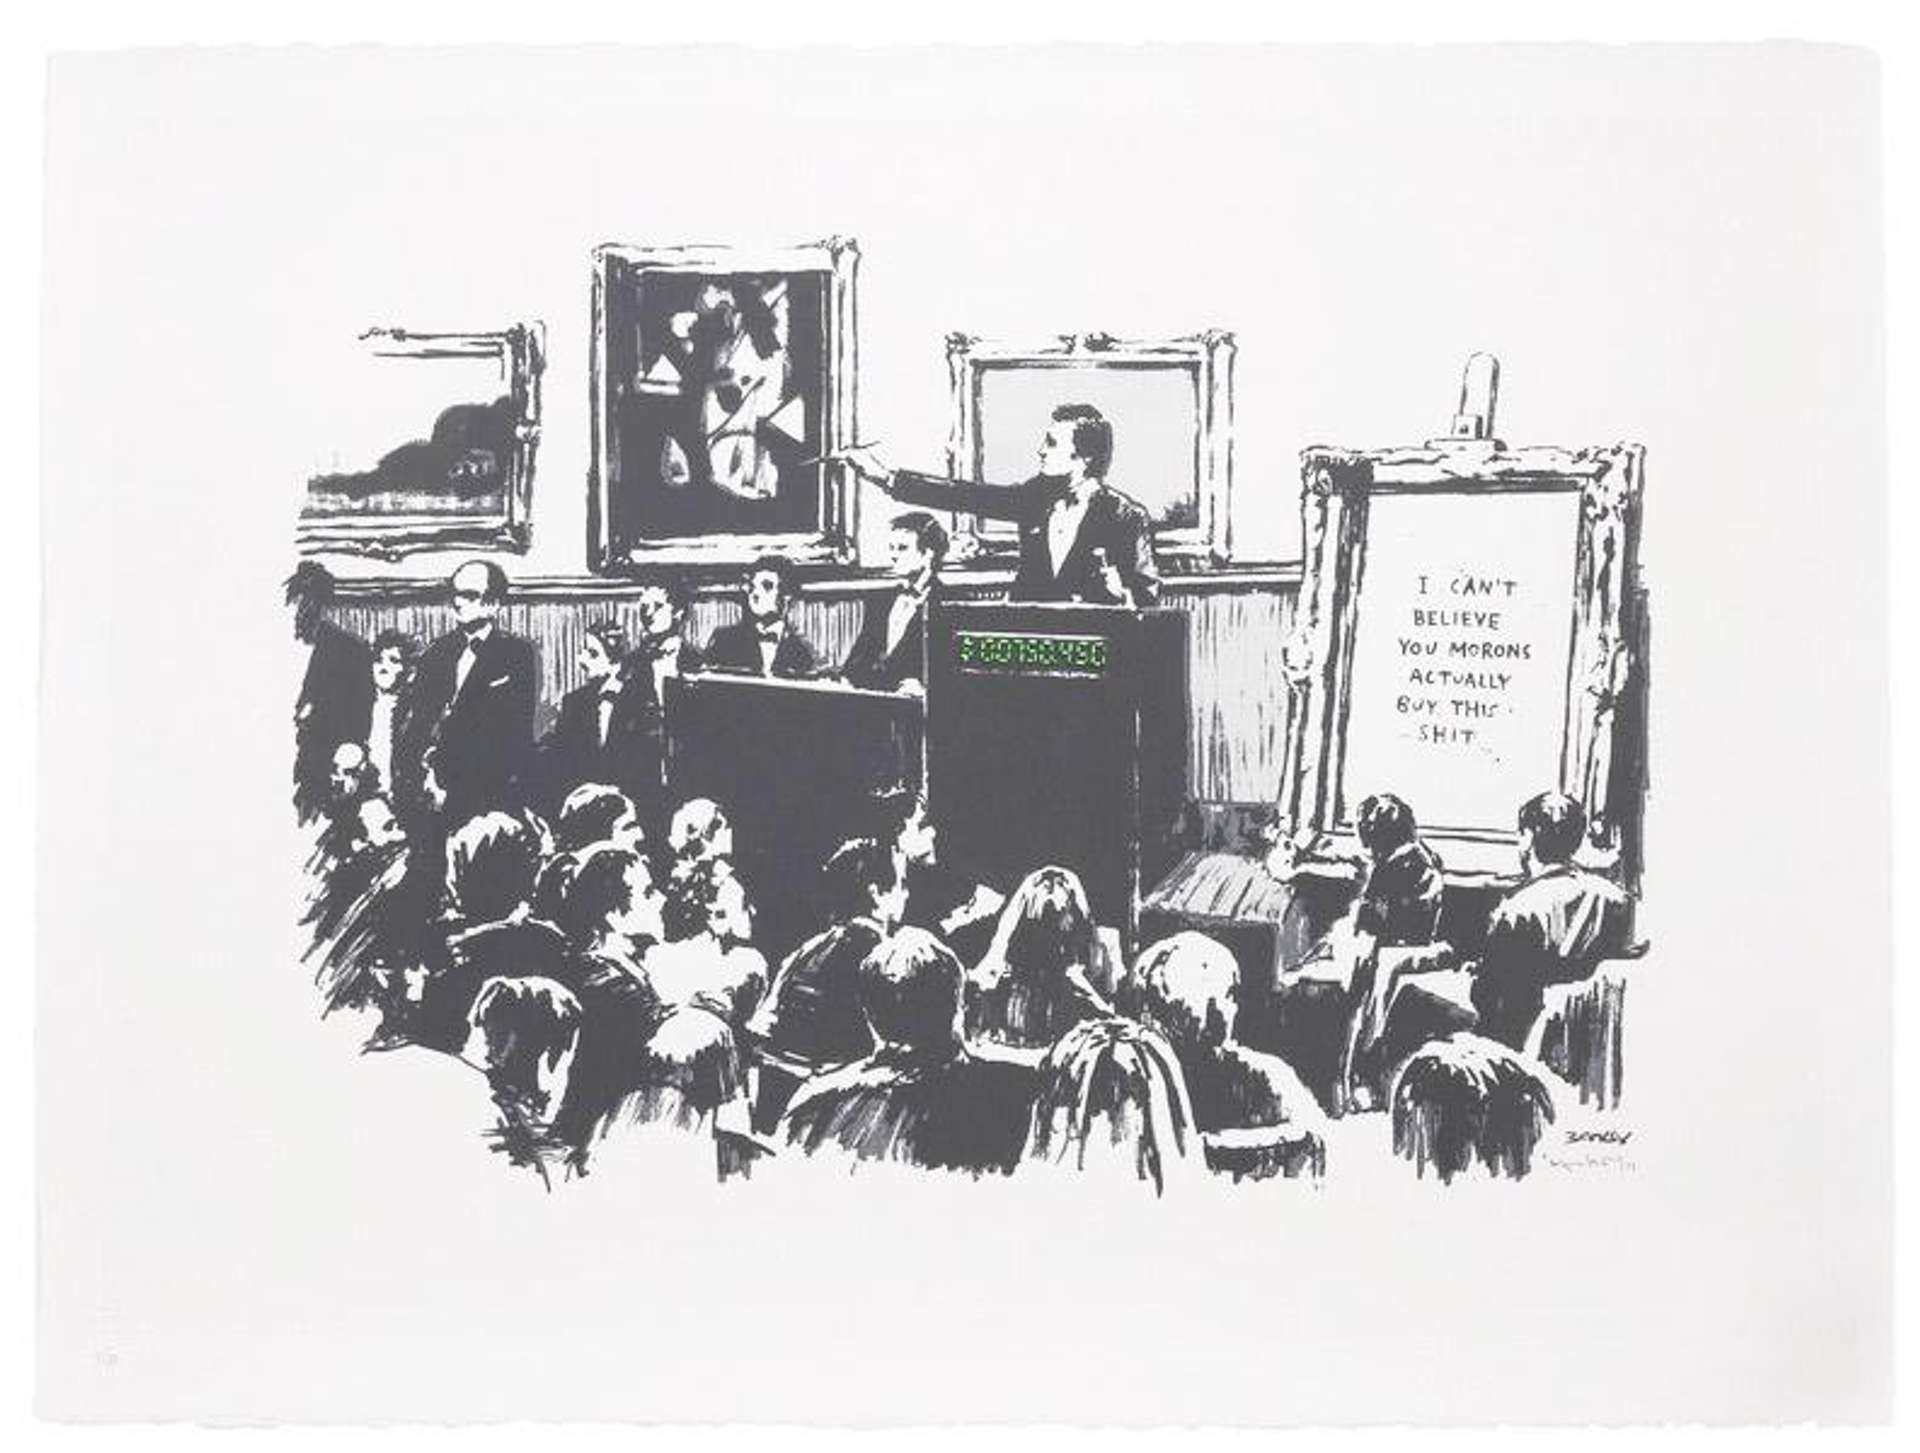 This largely monochromatic screen print in Banksy’s signature style portrays an auction room full of people in suits bidding for a number of artworks, including one in a gold frame (the only colour in the image) that reads, ‘I can’t believe you morons actually buy this shit’. 